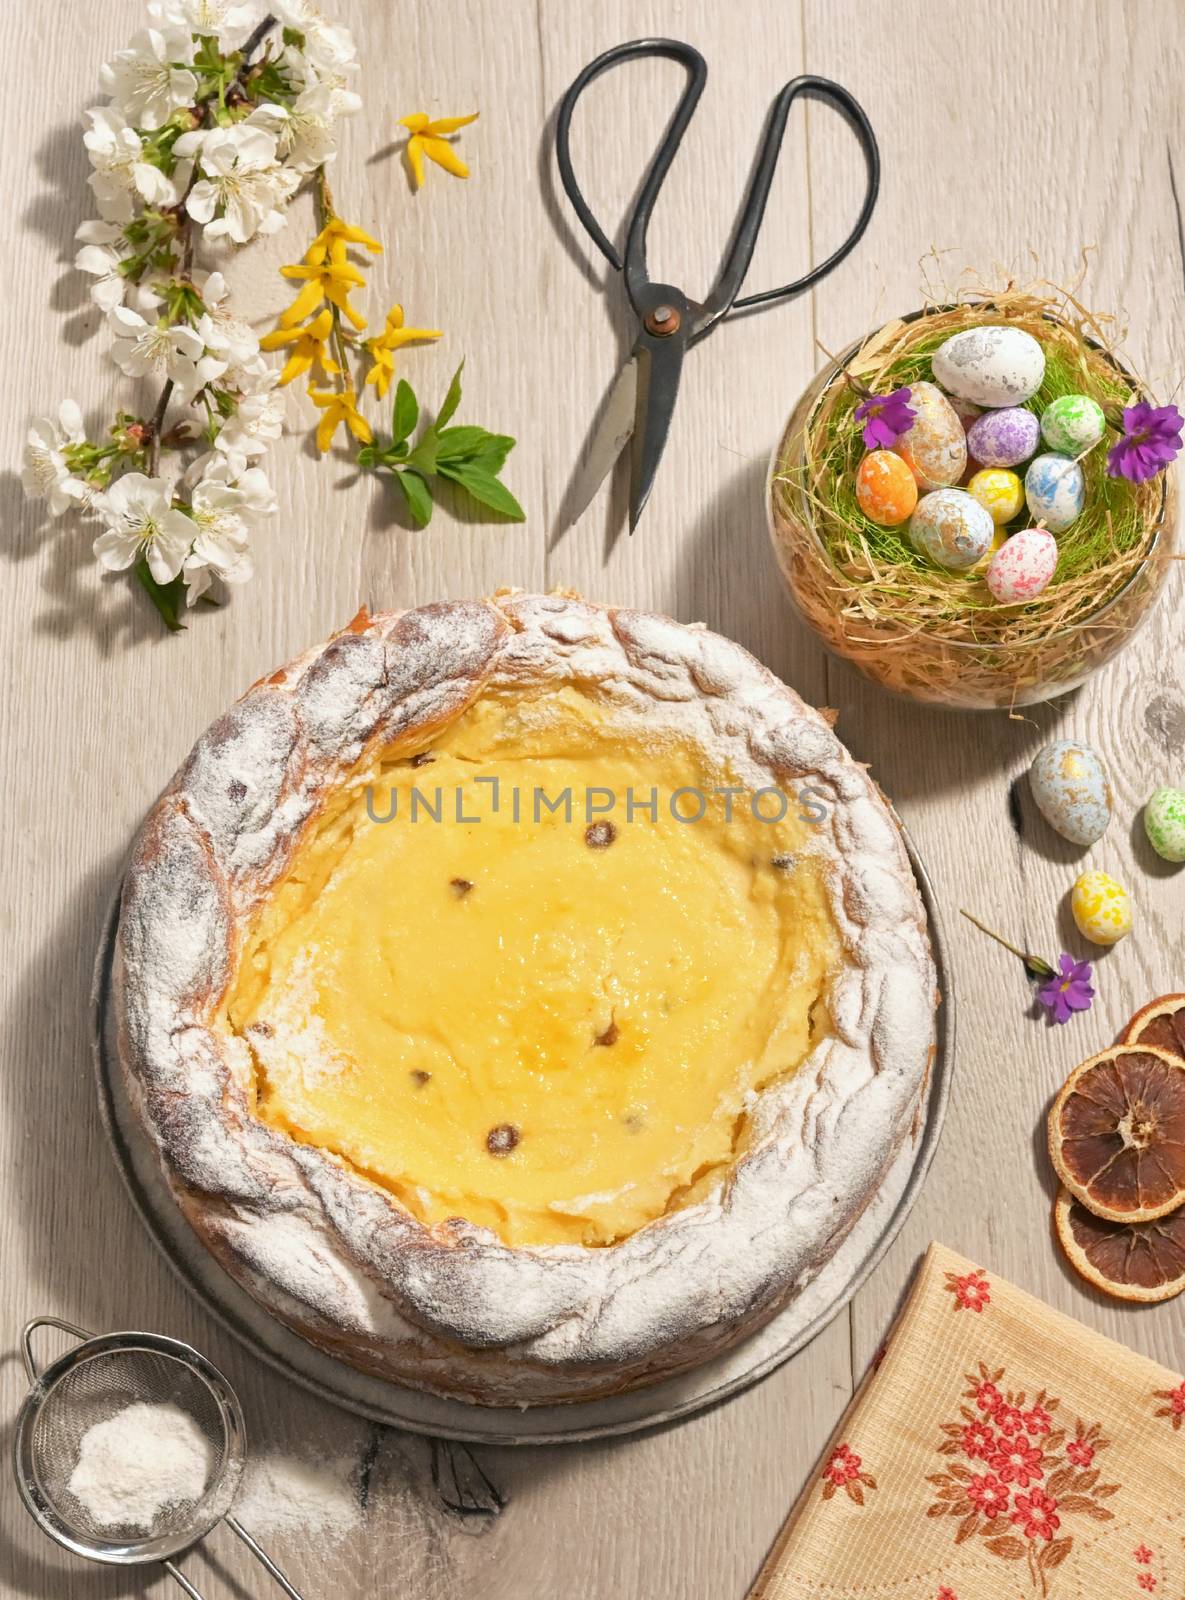 Romanian Easter bread – Pasca on Easter Table